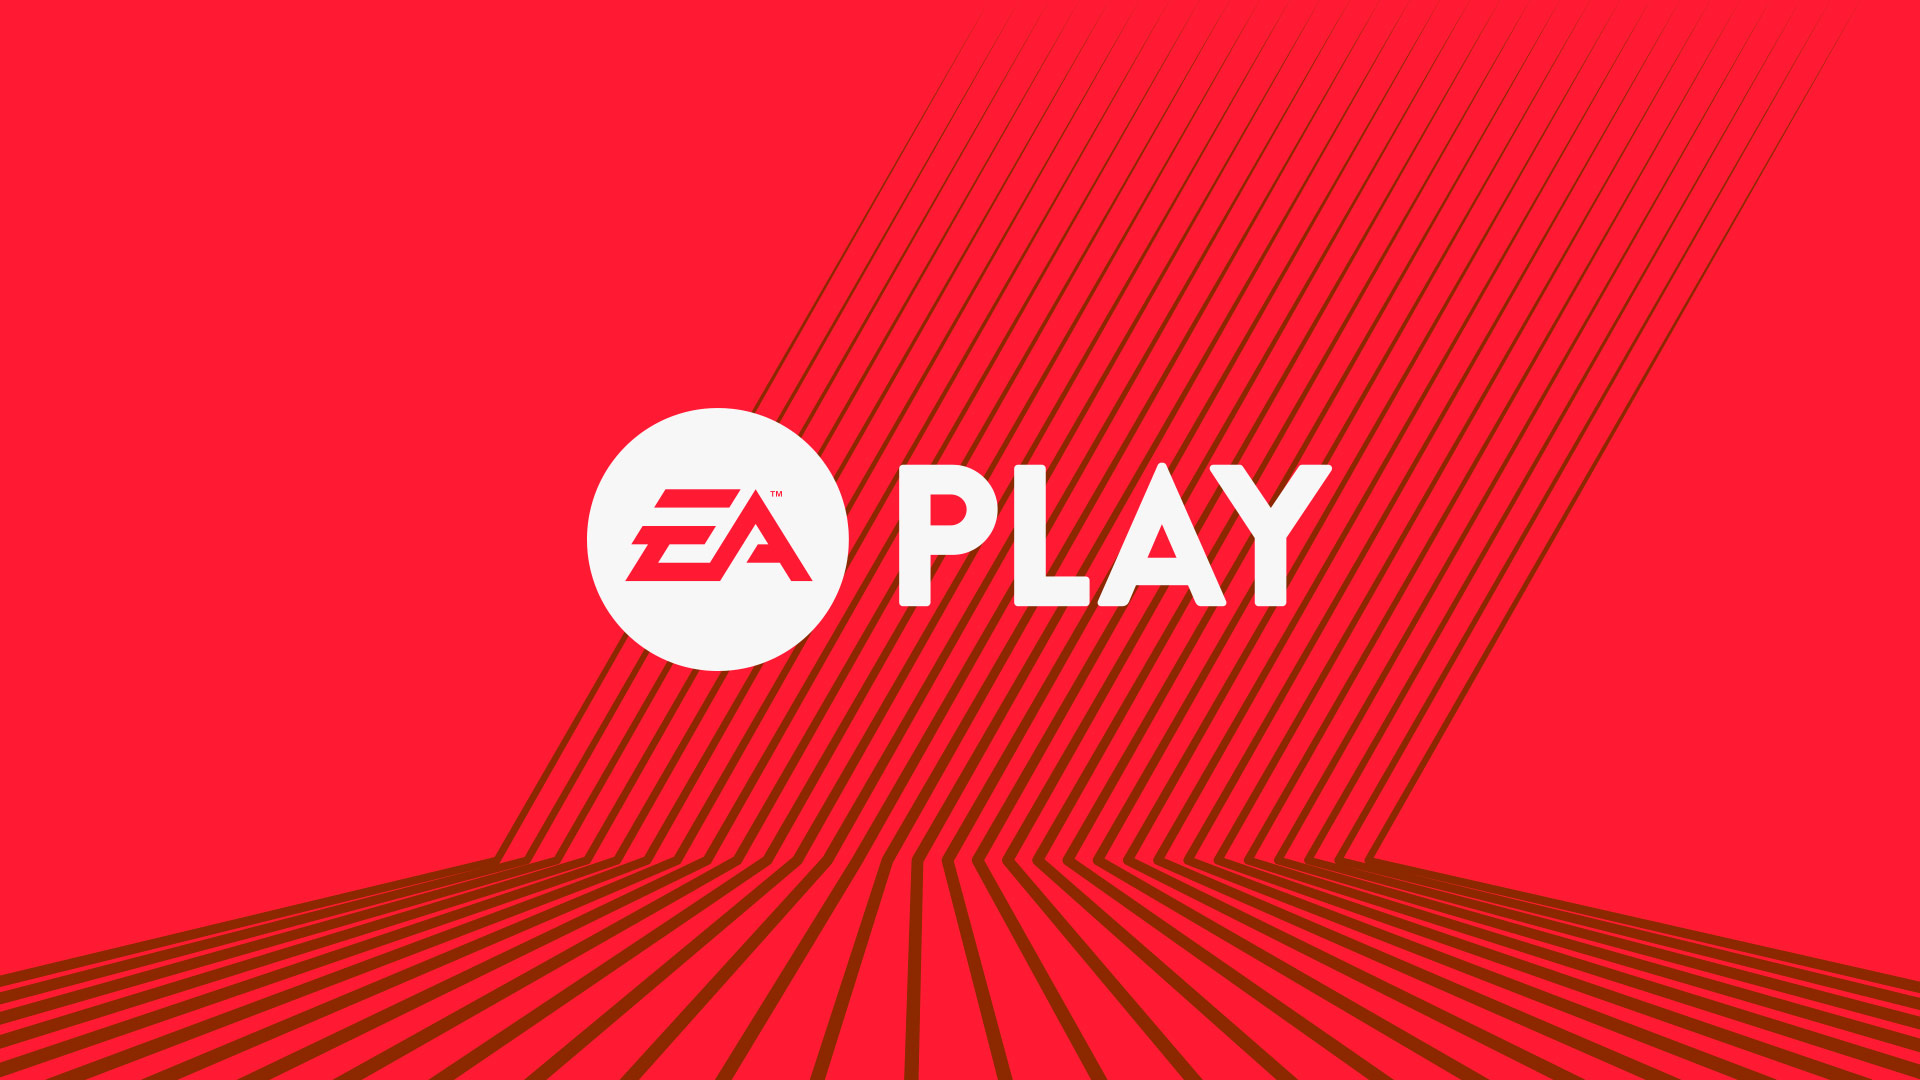 EA Play Live Confirmed For June 11, Features News & World Premieres